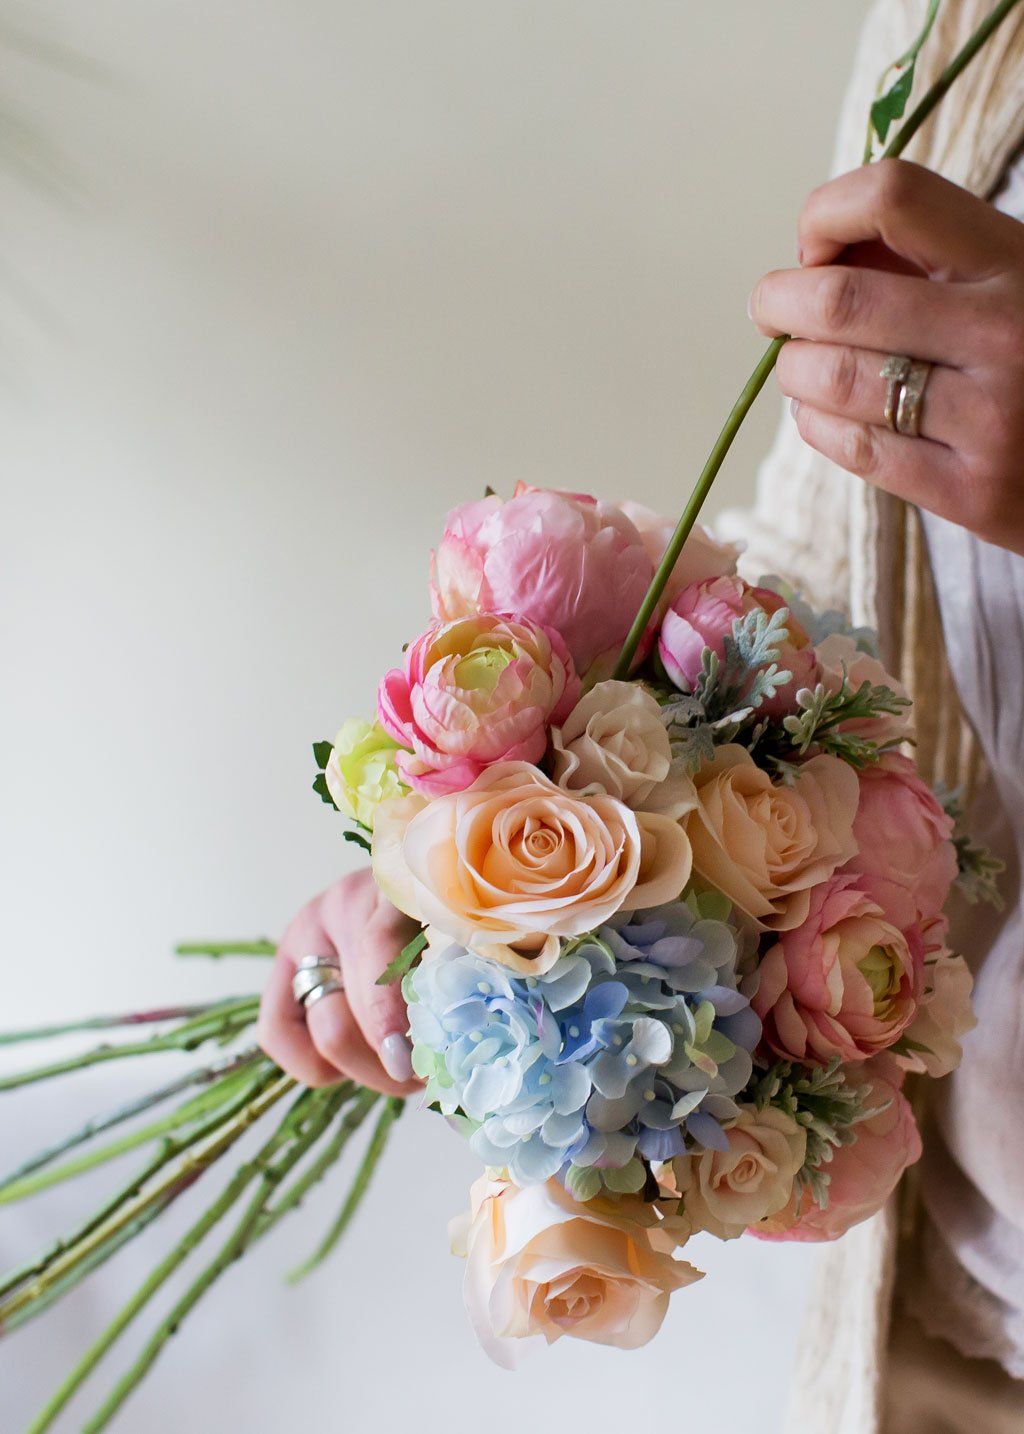 How To Make a Bridal Bouquet